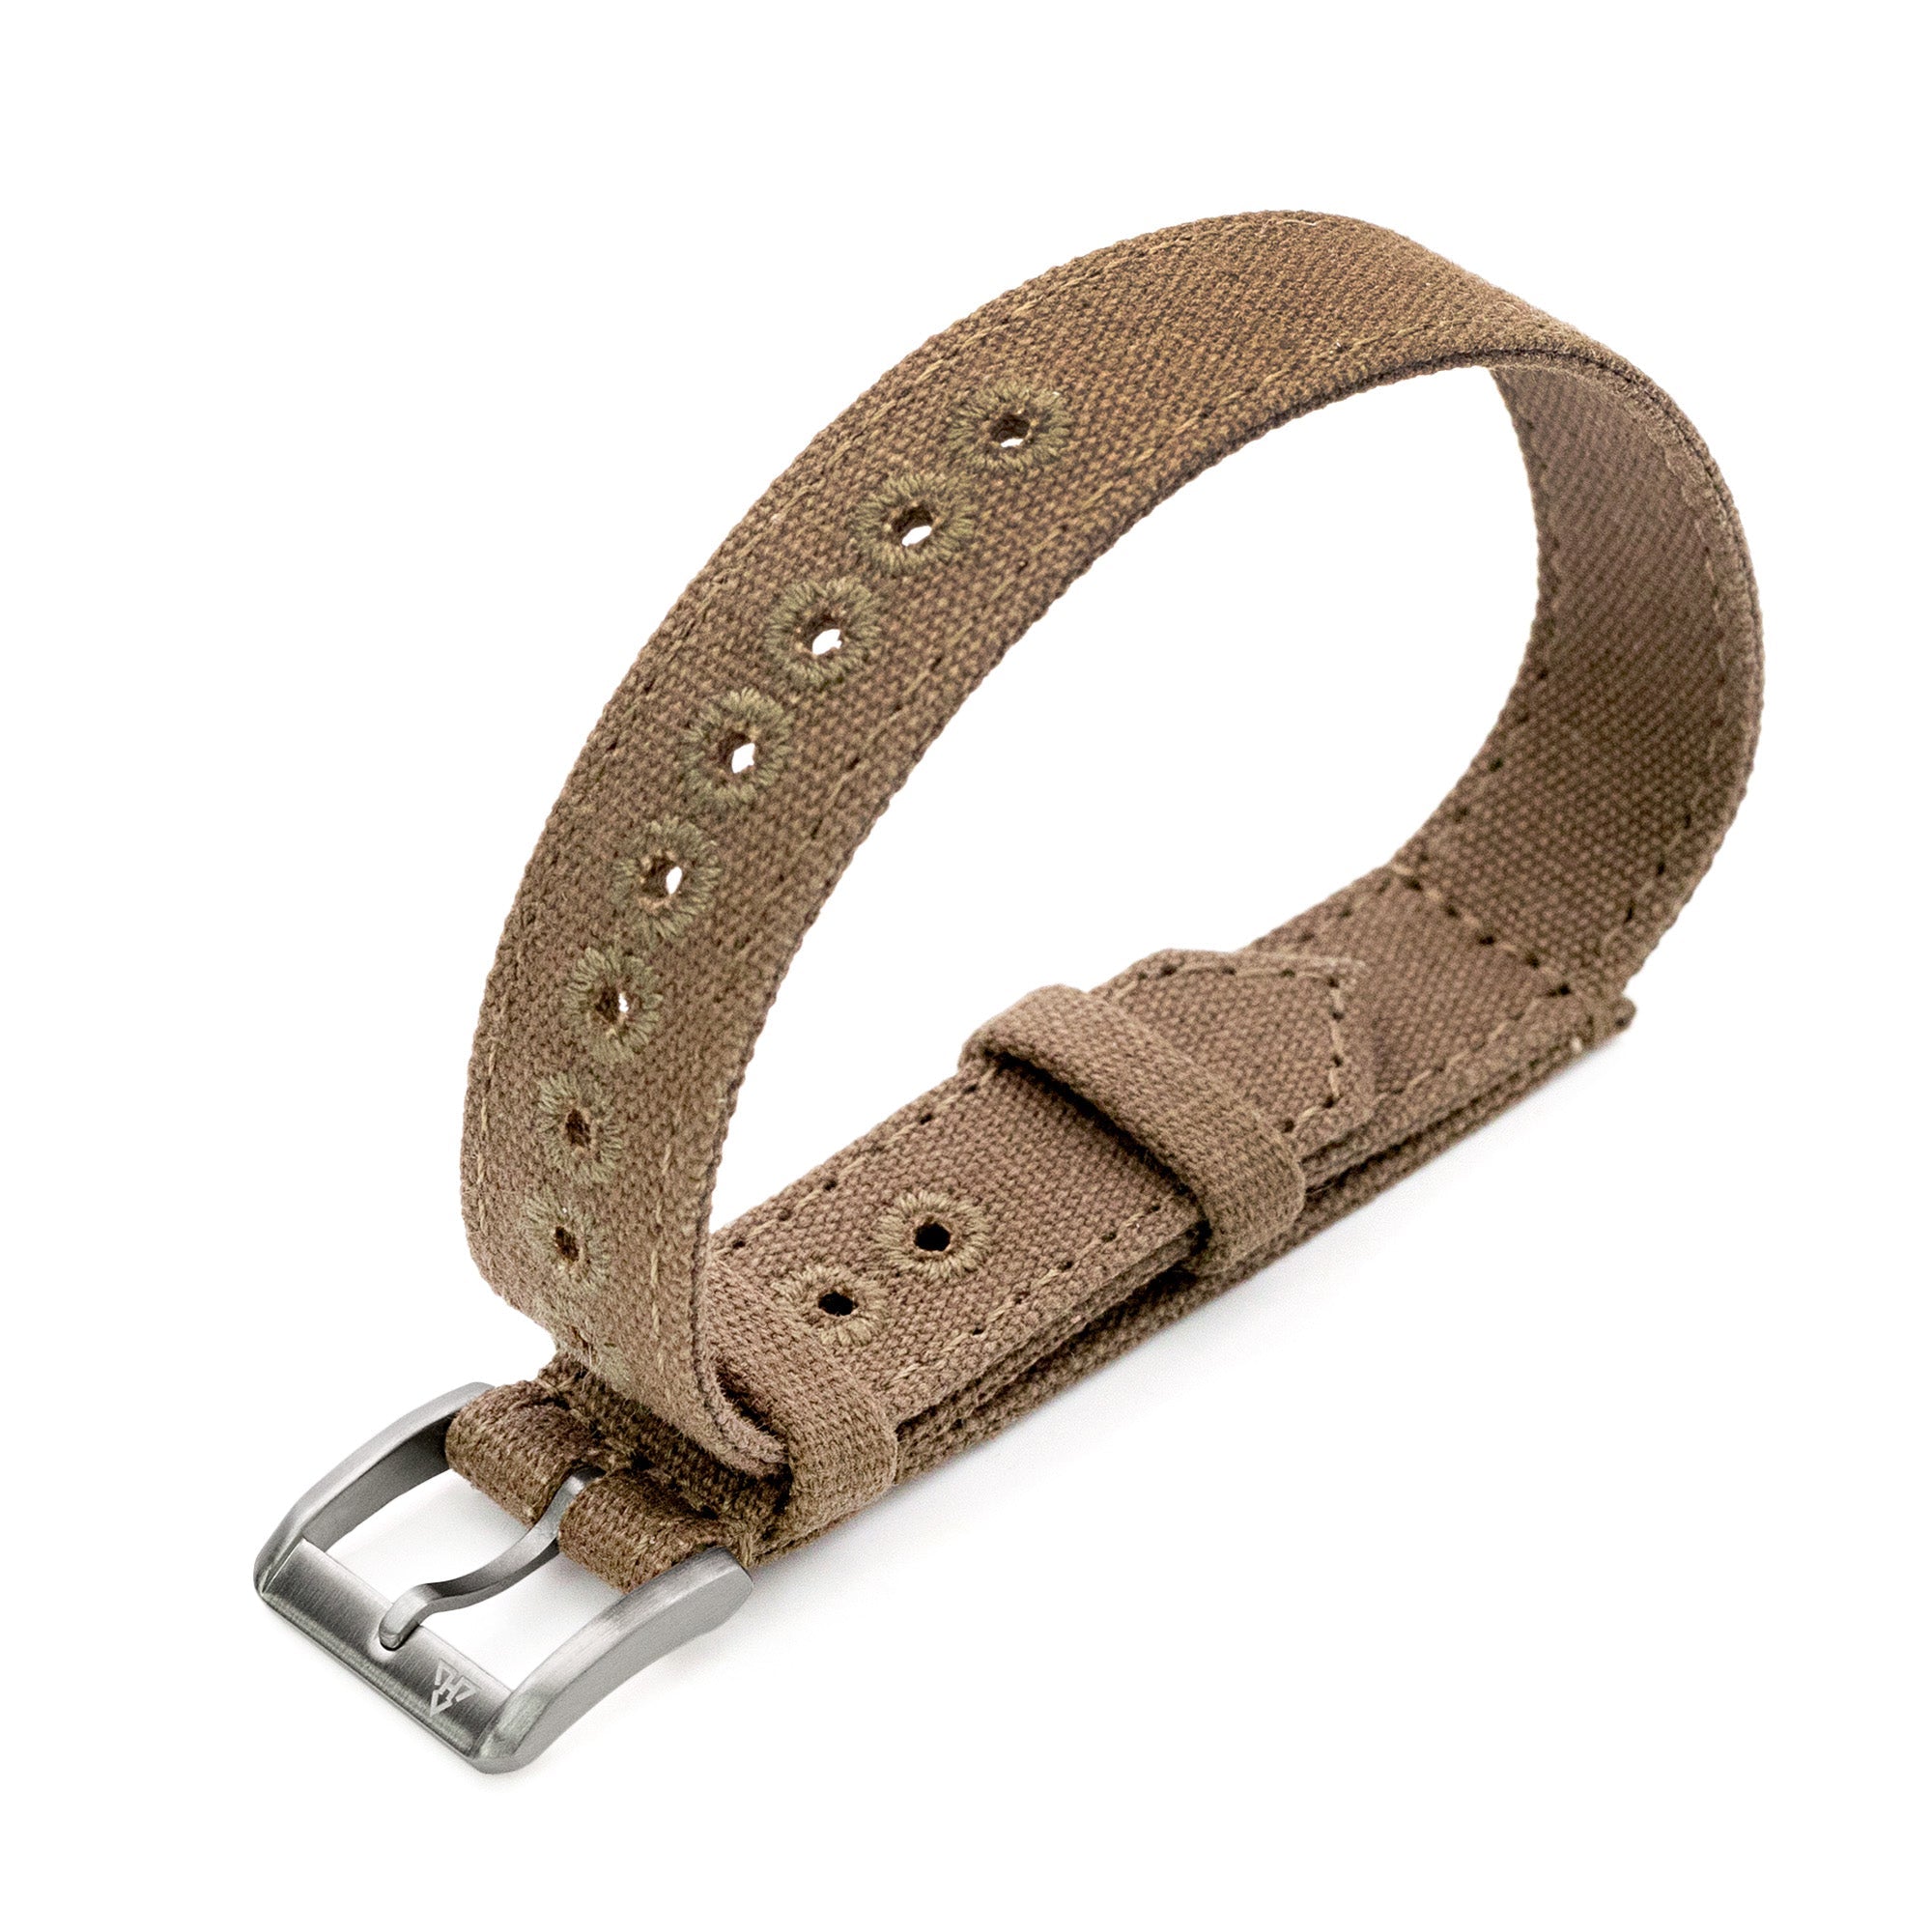 Khaki Sand 16mm Canvas NATO Watch Strap by HAVESTON Straps, Brushed Strapcode Watch Bands